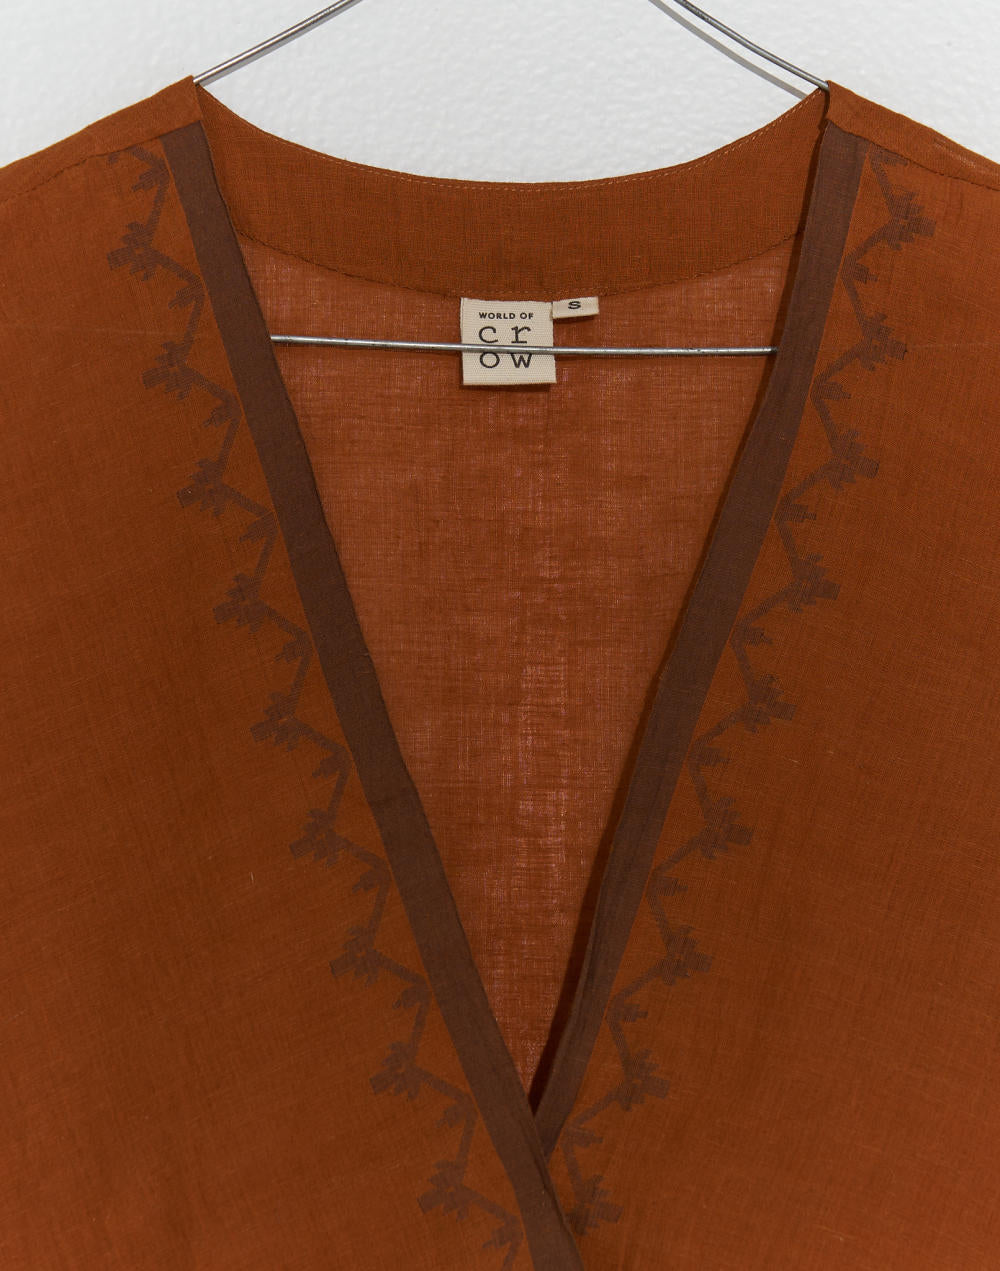 Russet lounge top